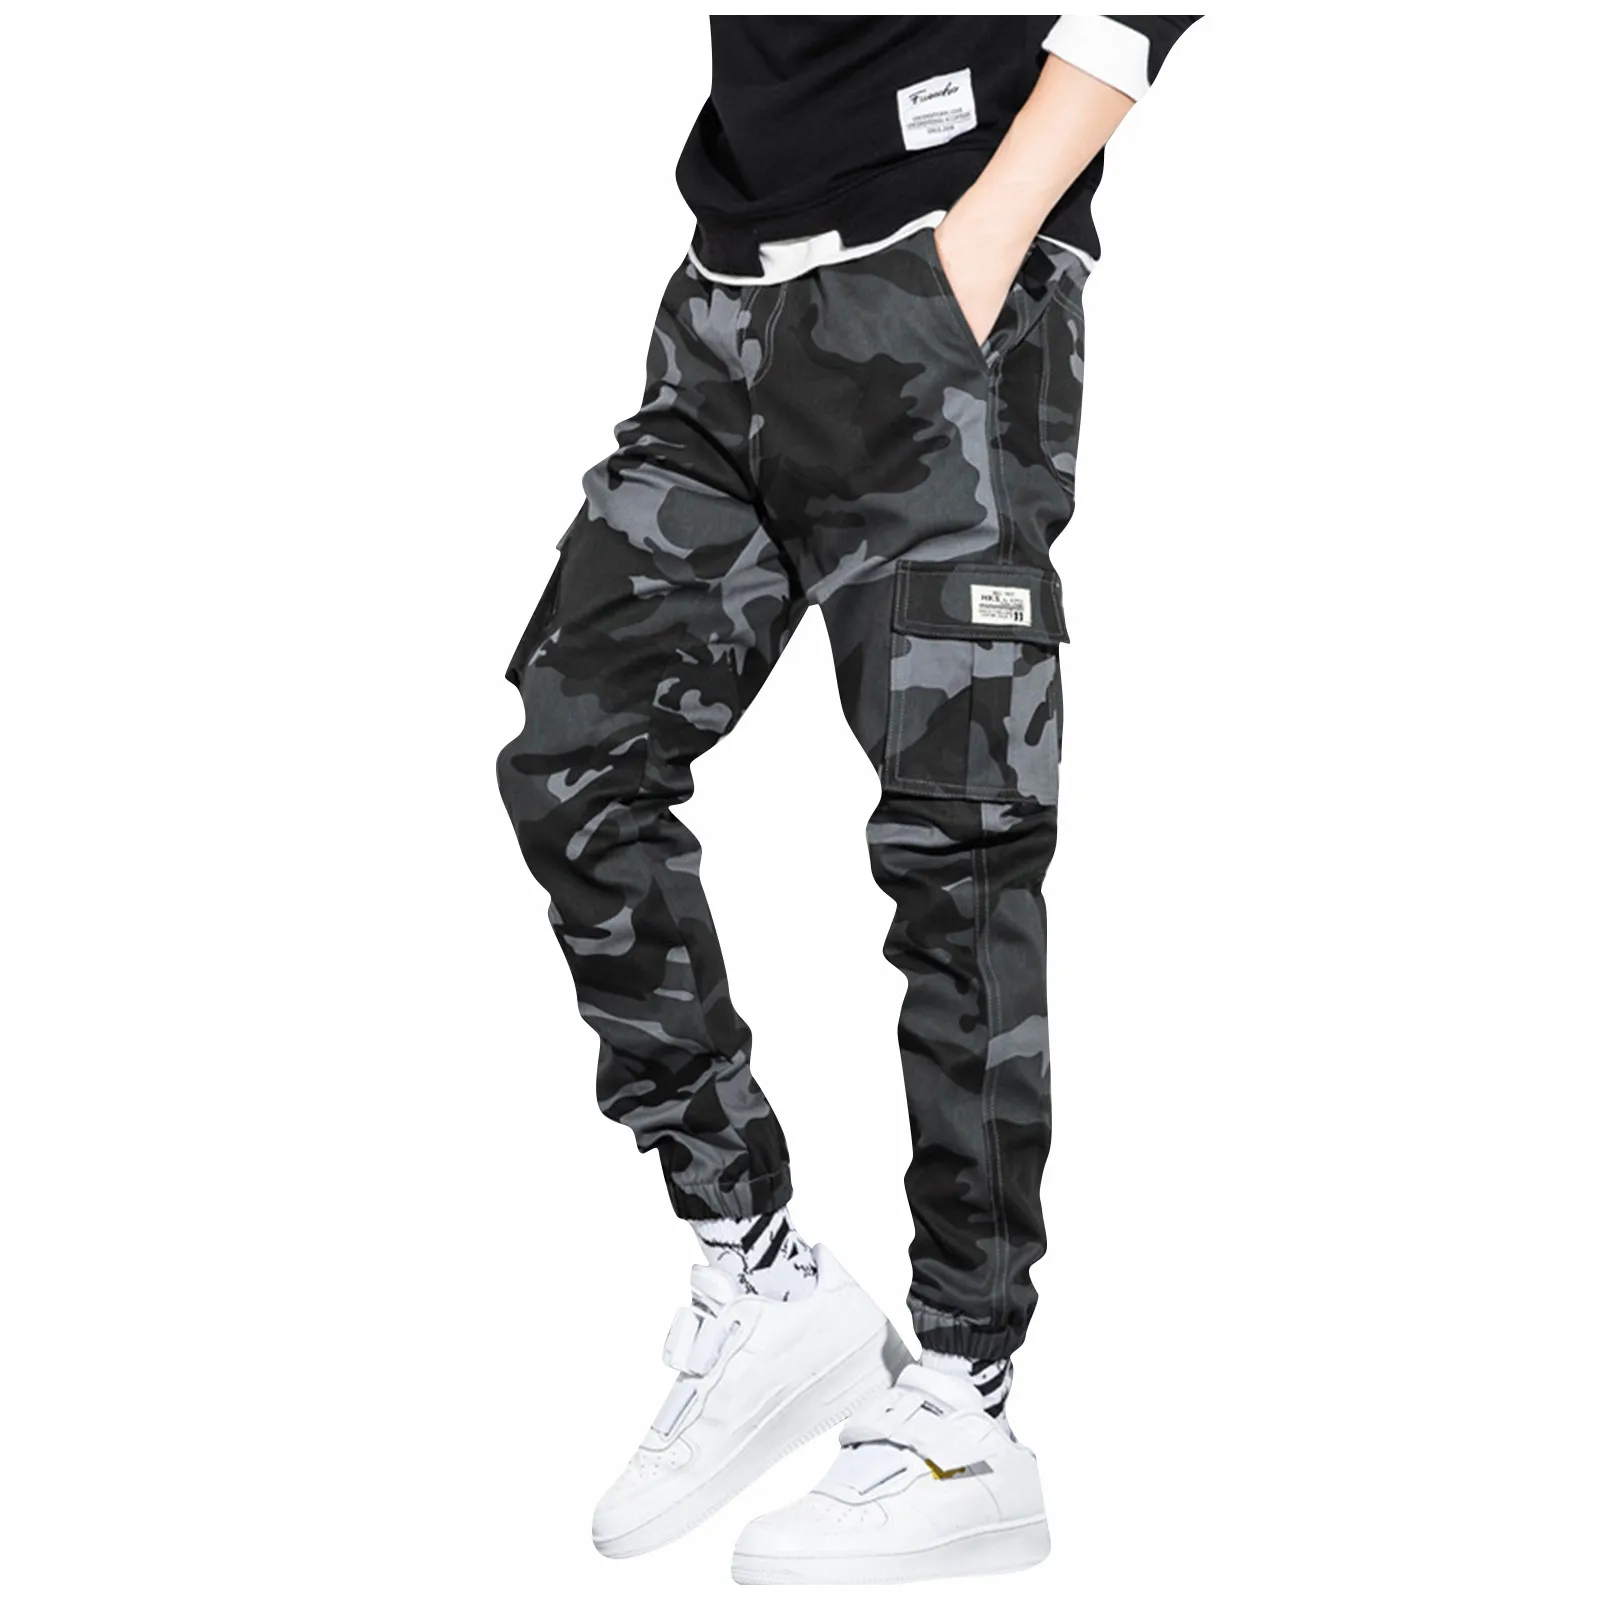 

Men Pants Casual Cargo Pants Military Tactical Army Trousers Male Breathable Waterproof Multi-Pockets Pant Size S-5xl Plus Size